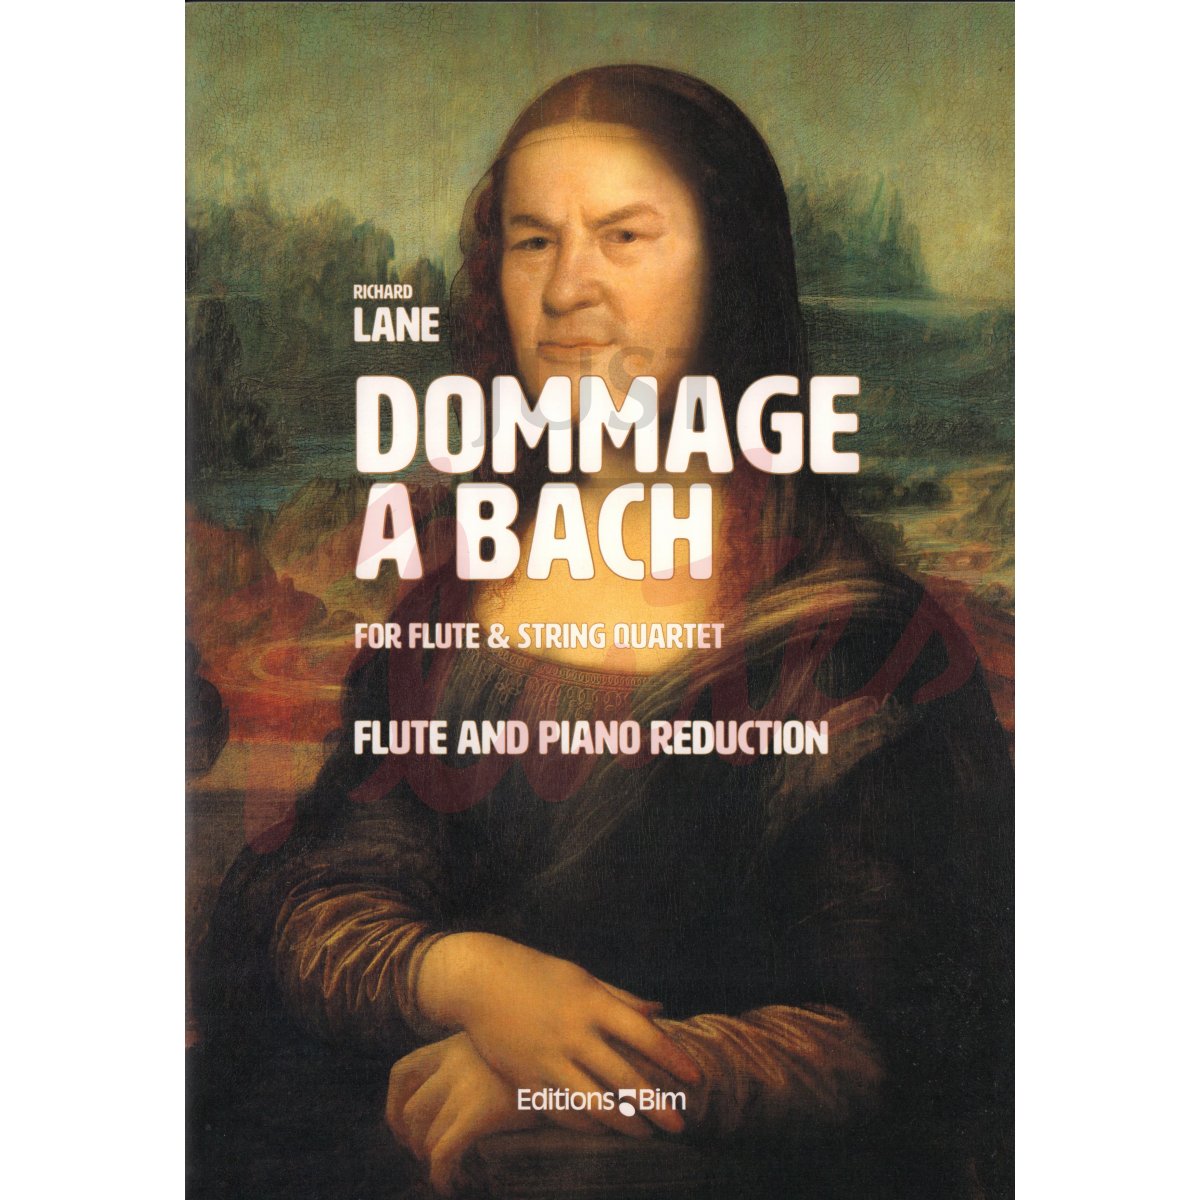 Dommage a Bach for Flute and Piano